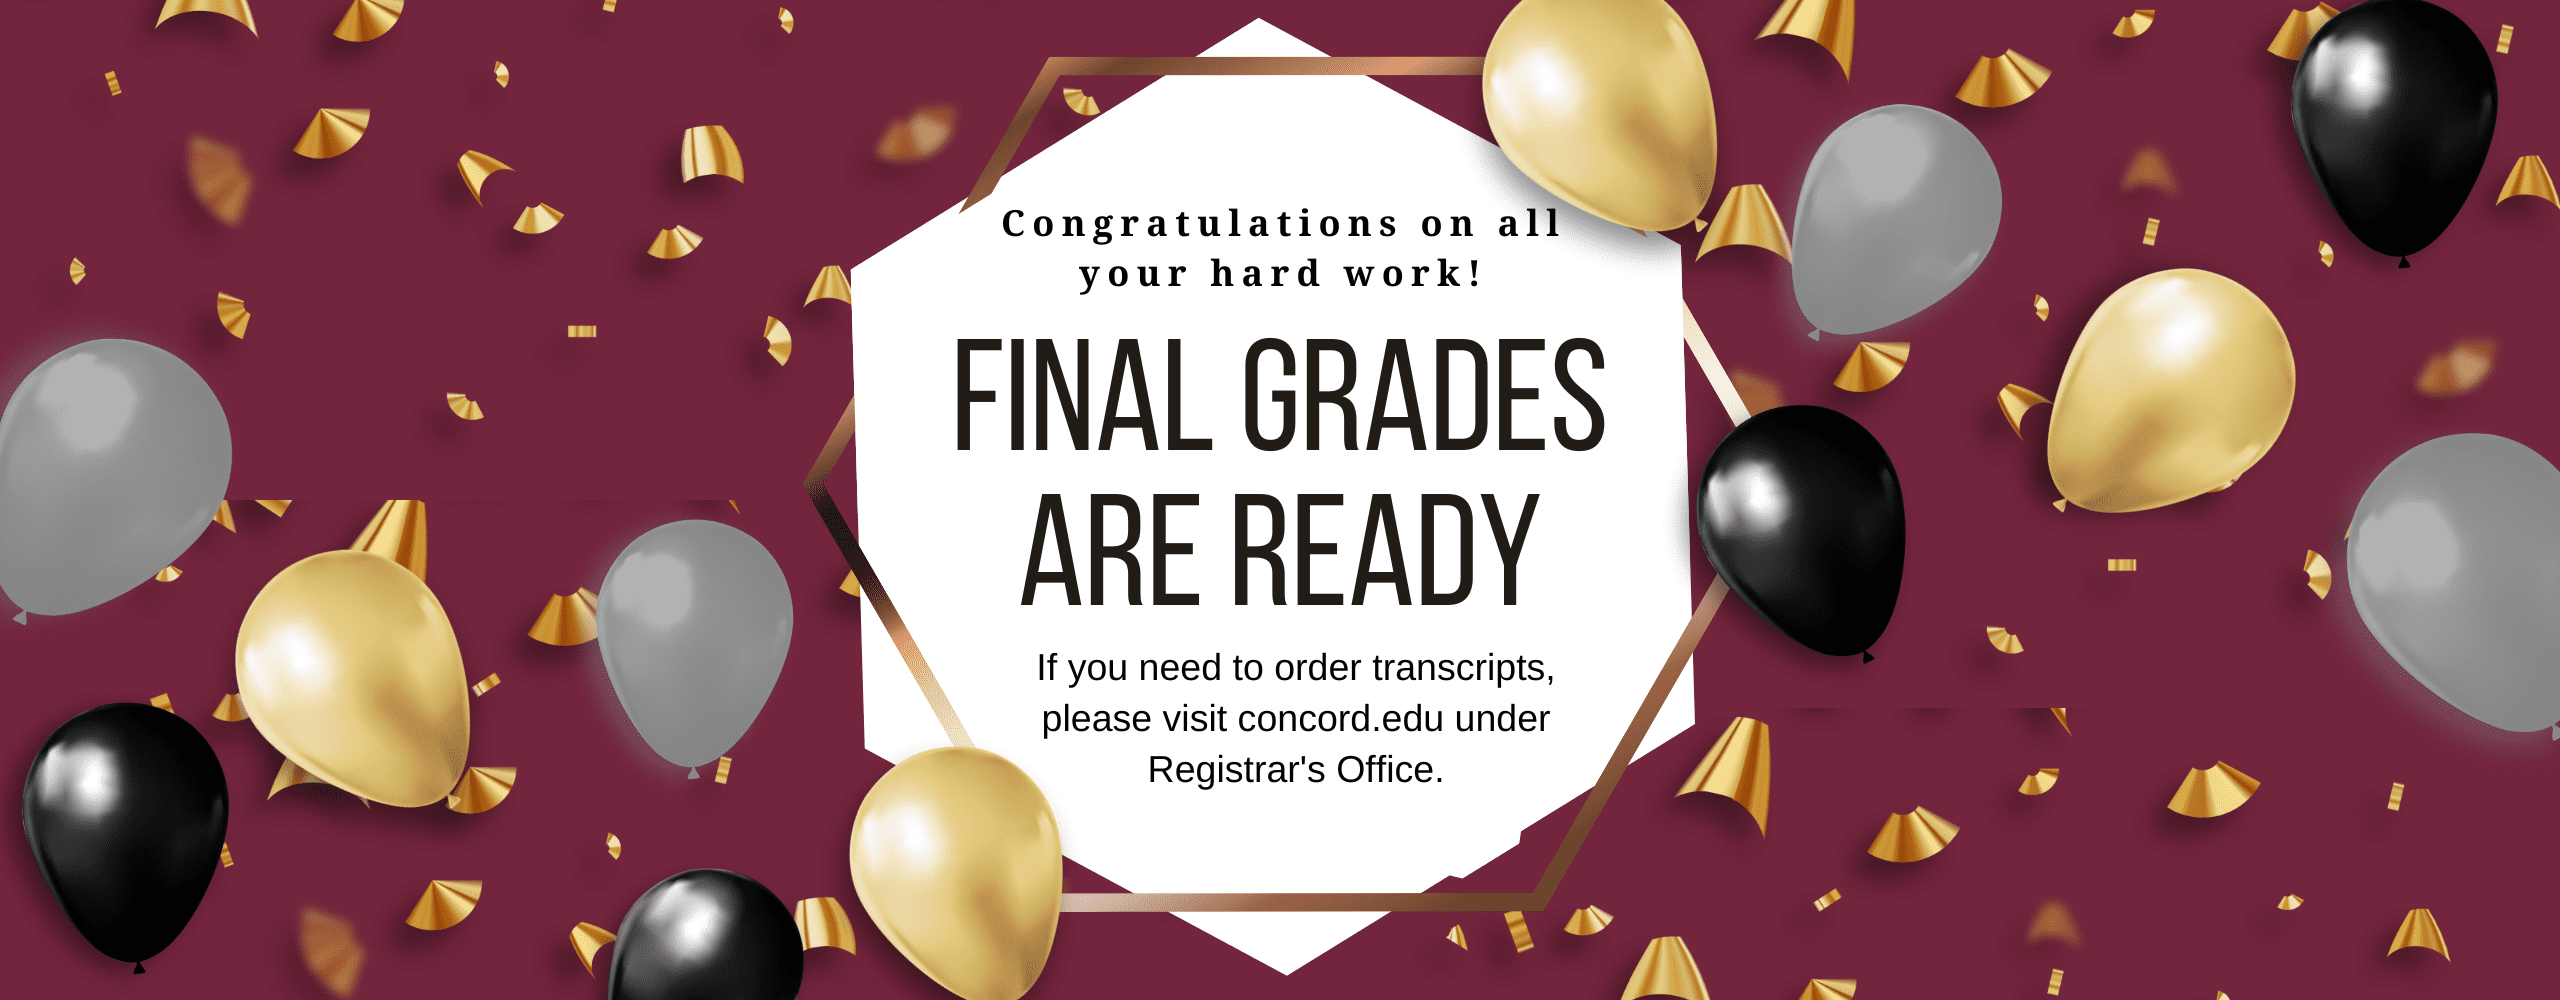 Students - congratulations on all your hard work! Final grades are ready. If you need to order transcripts, please visit concord.edu/academics/registrar to read more about how to order transcripts